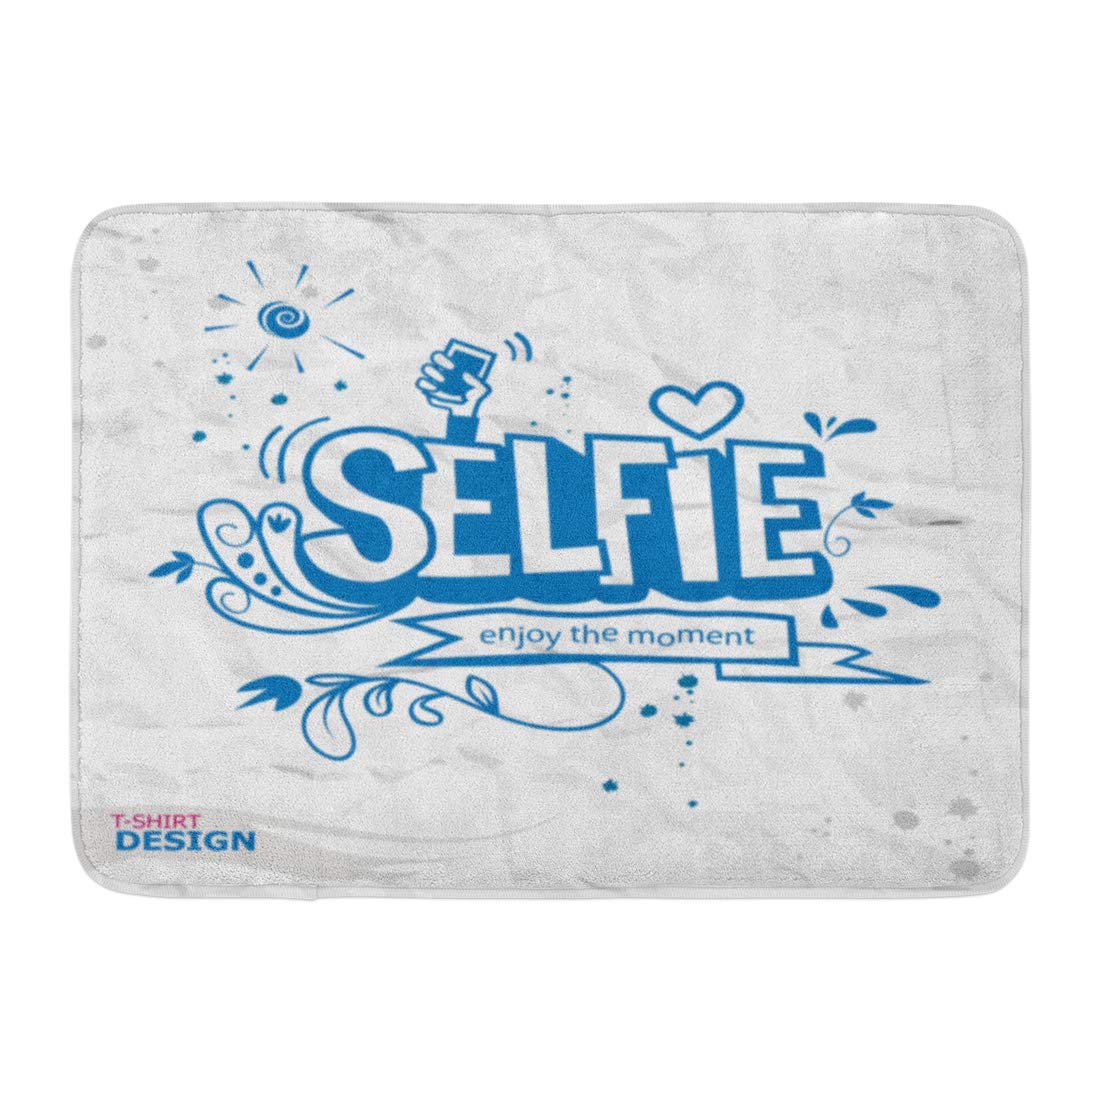 GODPOK Camera Fun Take Selfie Motivation Quote Hand Lettering on Letter Text Rug Doormat Bath Mat 23.6x15.7 inch - image 1 of 1